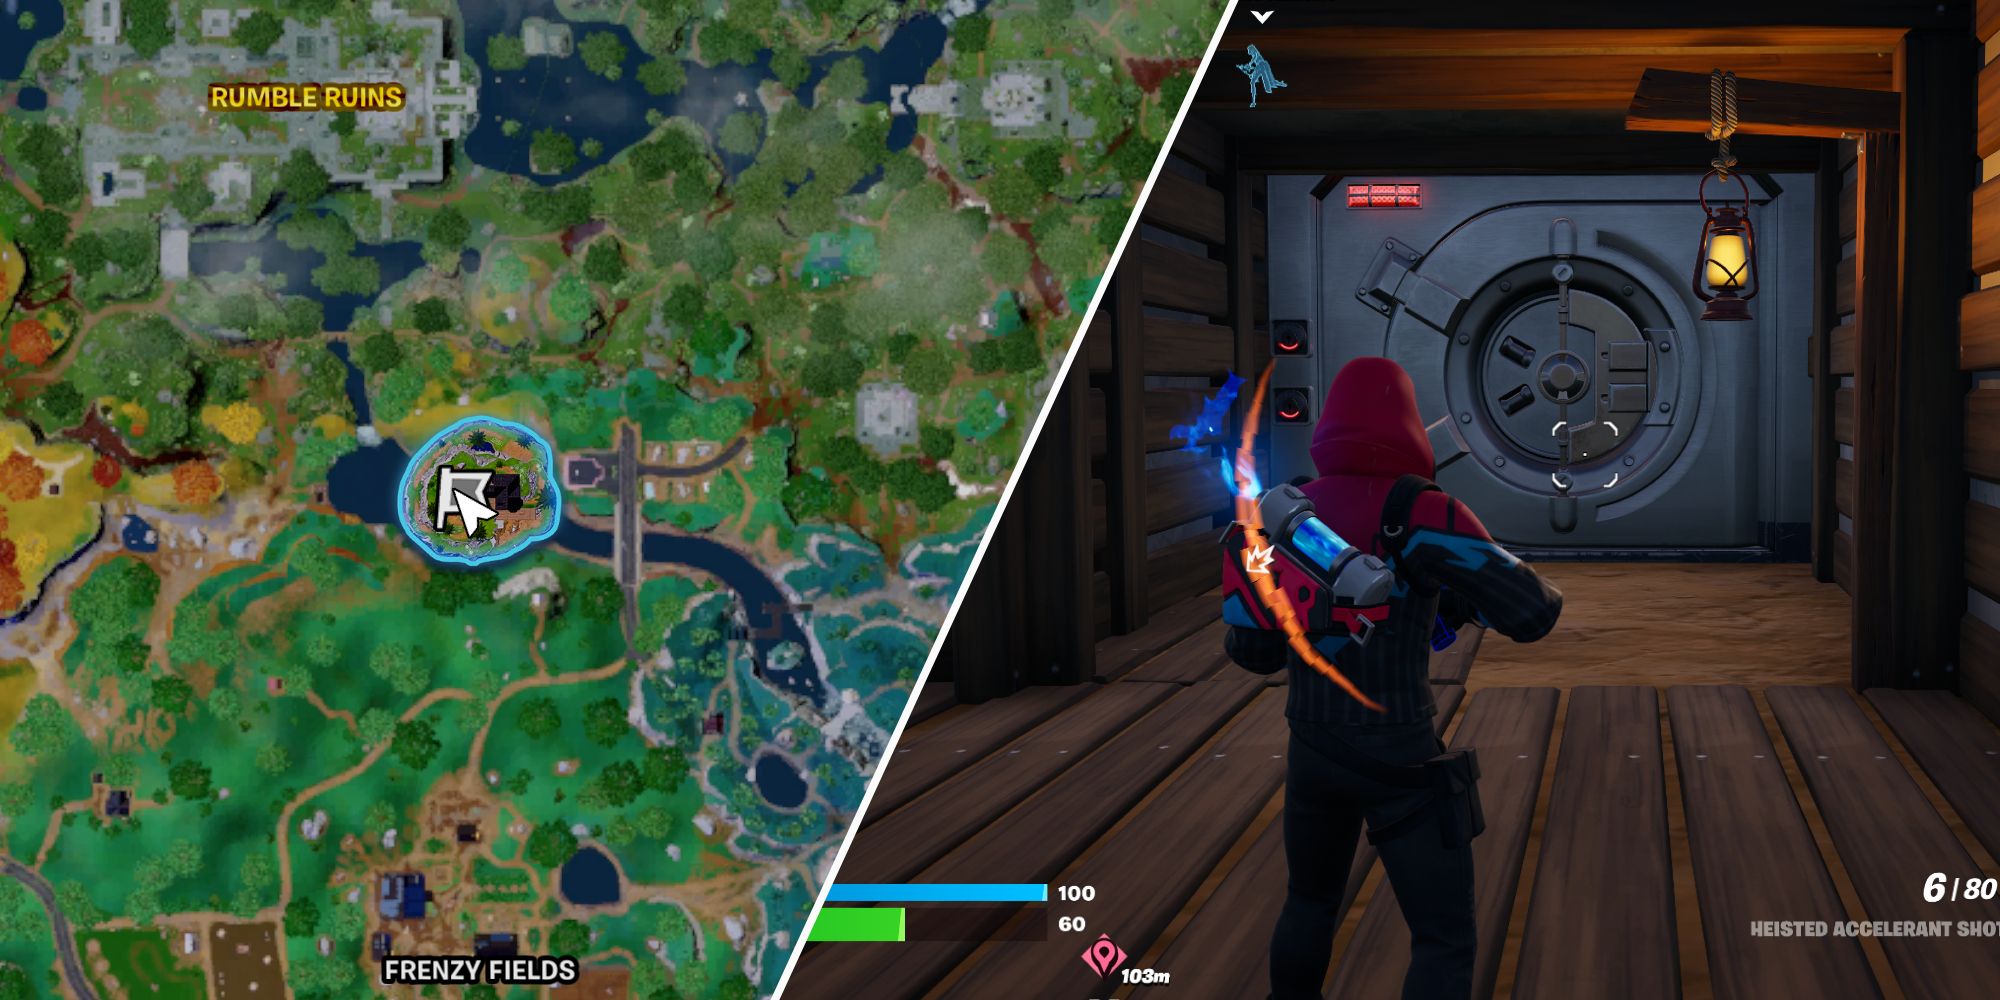 How to solve a puzzle at a ruin in Fortnite - VideoGamer